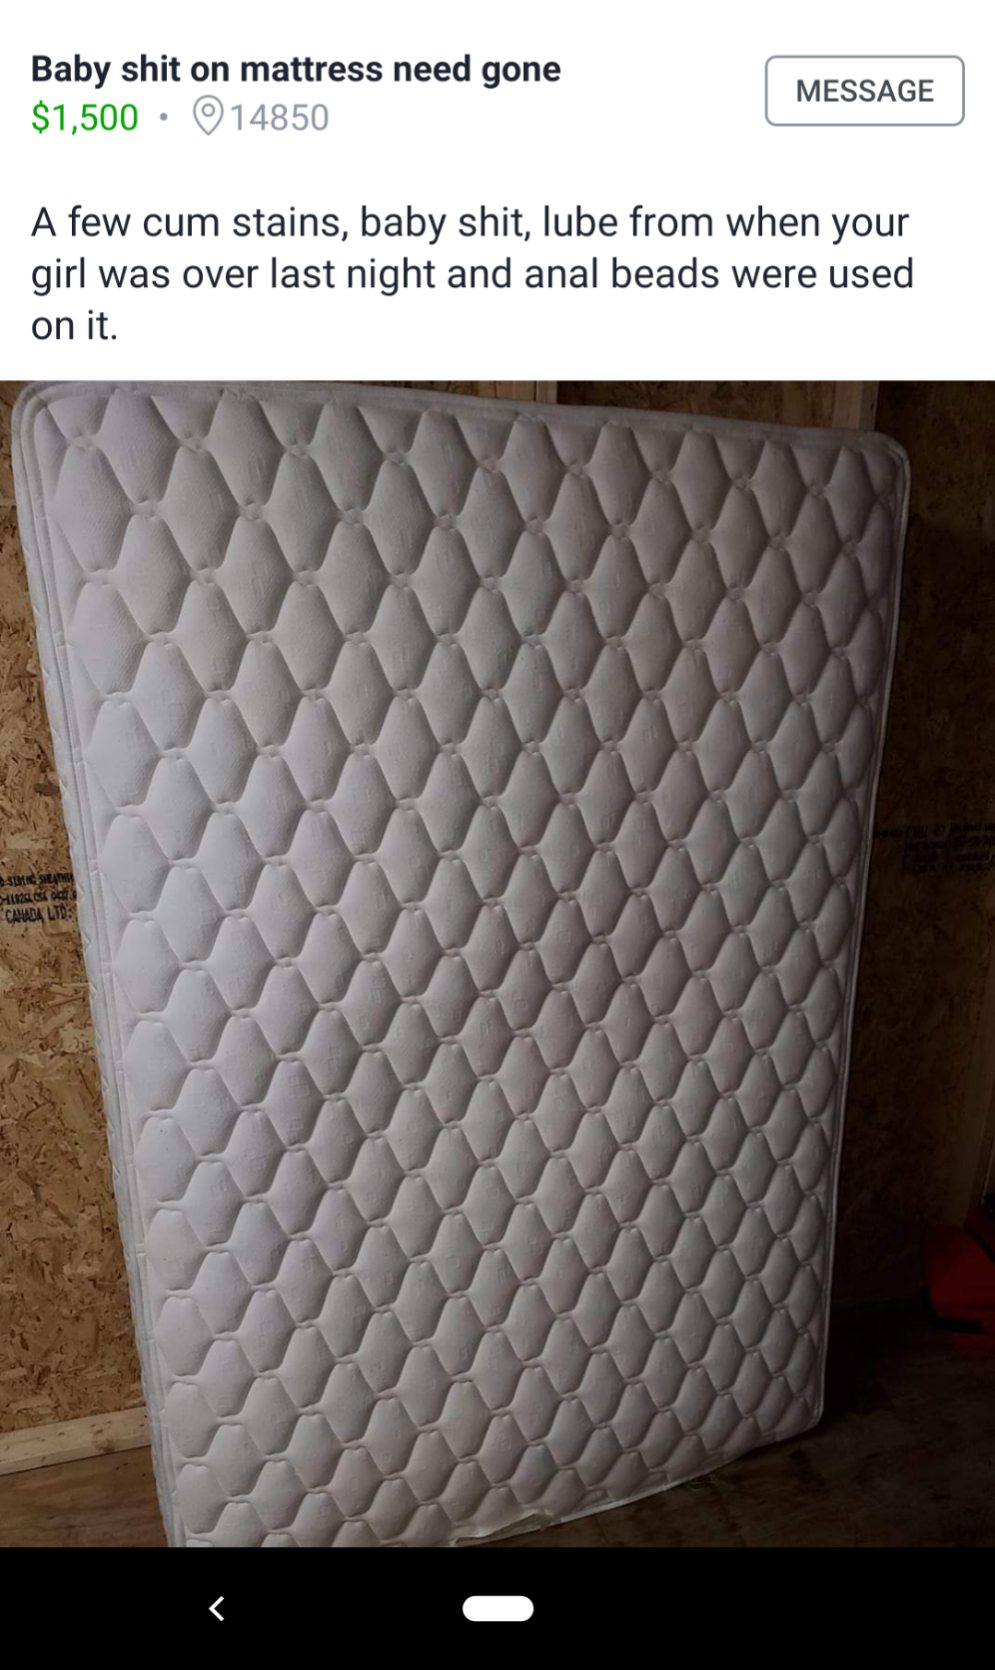 cumshit on diaper - Baby shit on mattress need gone $1,500 14850 Message A few cum stains, baby shit, lube from when your girl was over last night and anal beads were used on it.